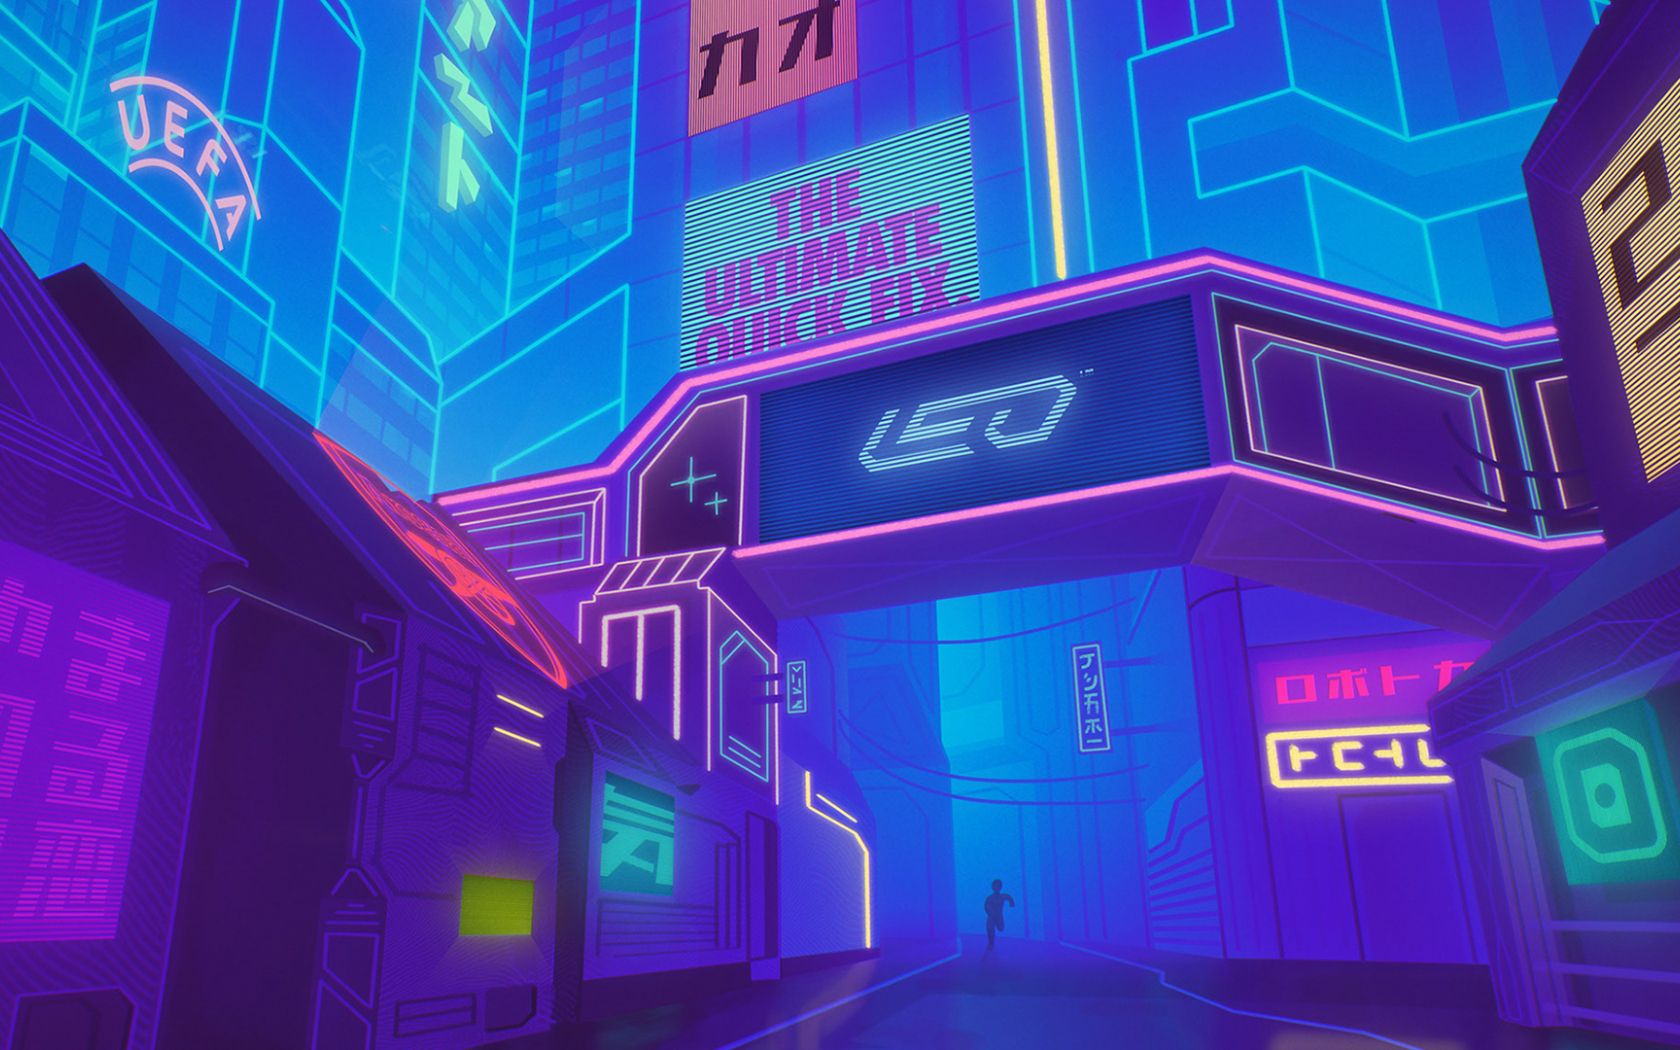 A digital cityscape with glowing signs and neon lights - Cyberpunk